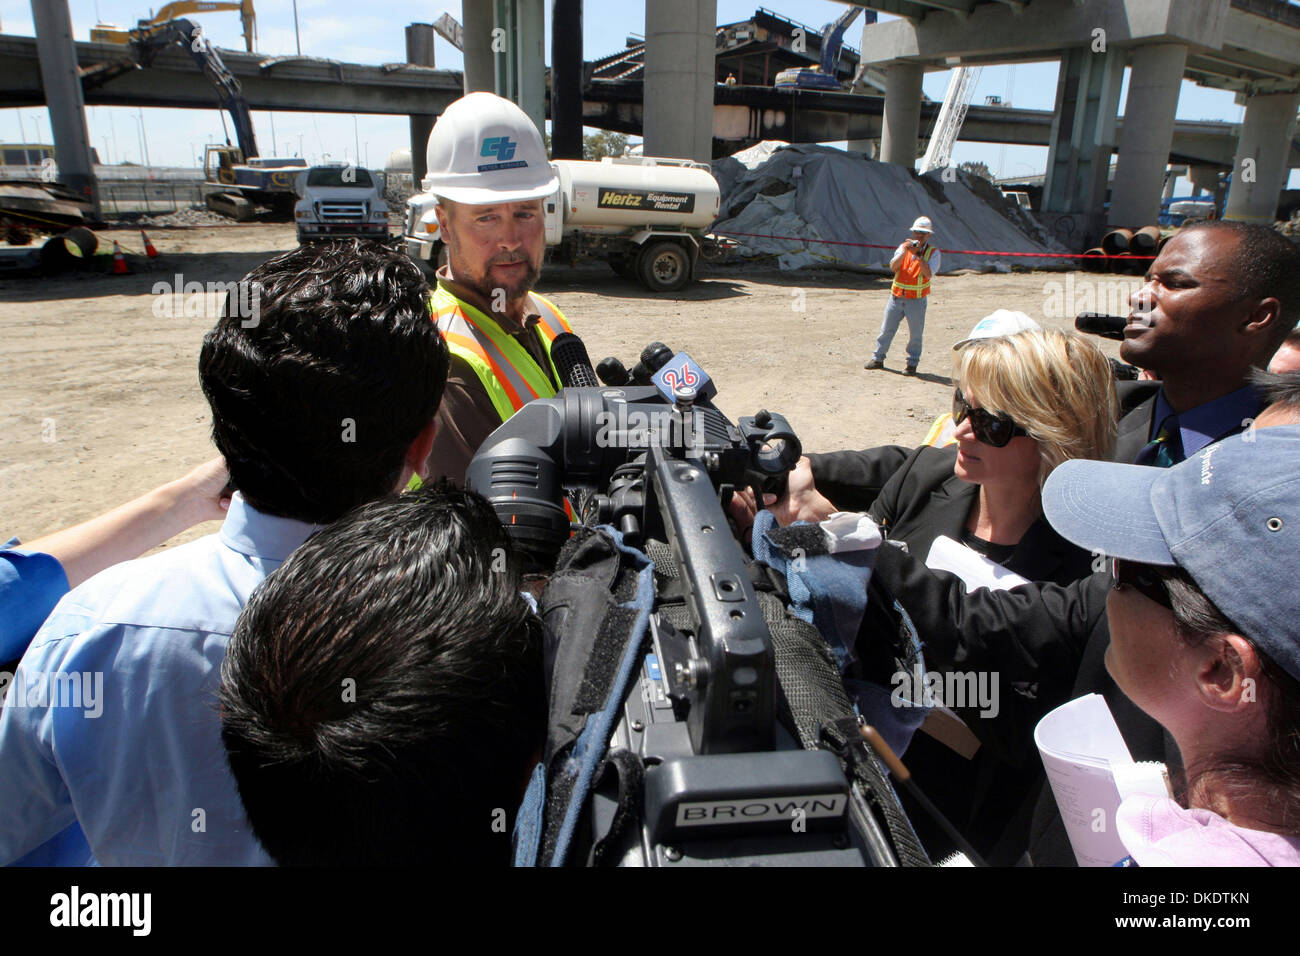 Apr 30, 2007 - Emeryville, CA, USA - Caltrans structural engineer and project manager, Peter Strykers, updates the media on the work and analysis of the 80 to 580 interchange that collapsed Sunday morning from a tanker fire at the scene of the work in Emeryville. The tanker which crashed in a fiery explosion the day before caused the collapse of two sections of the freeway which ty Stock Photo